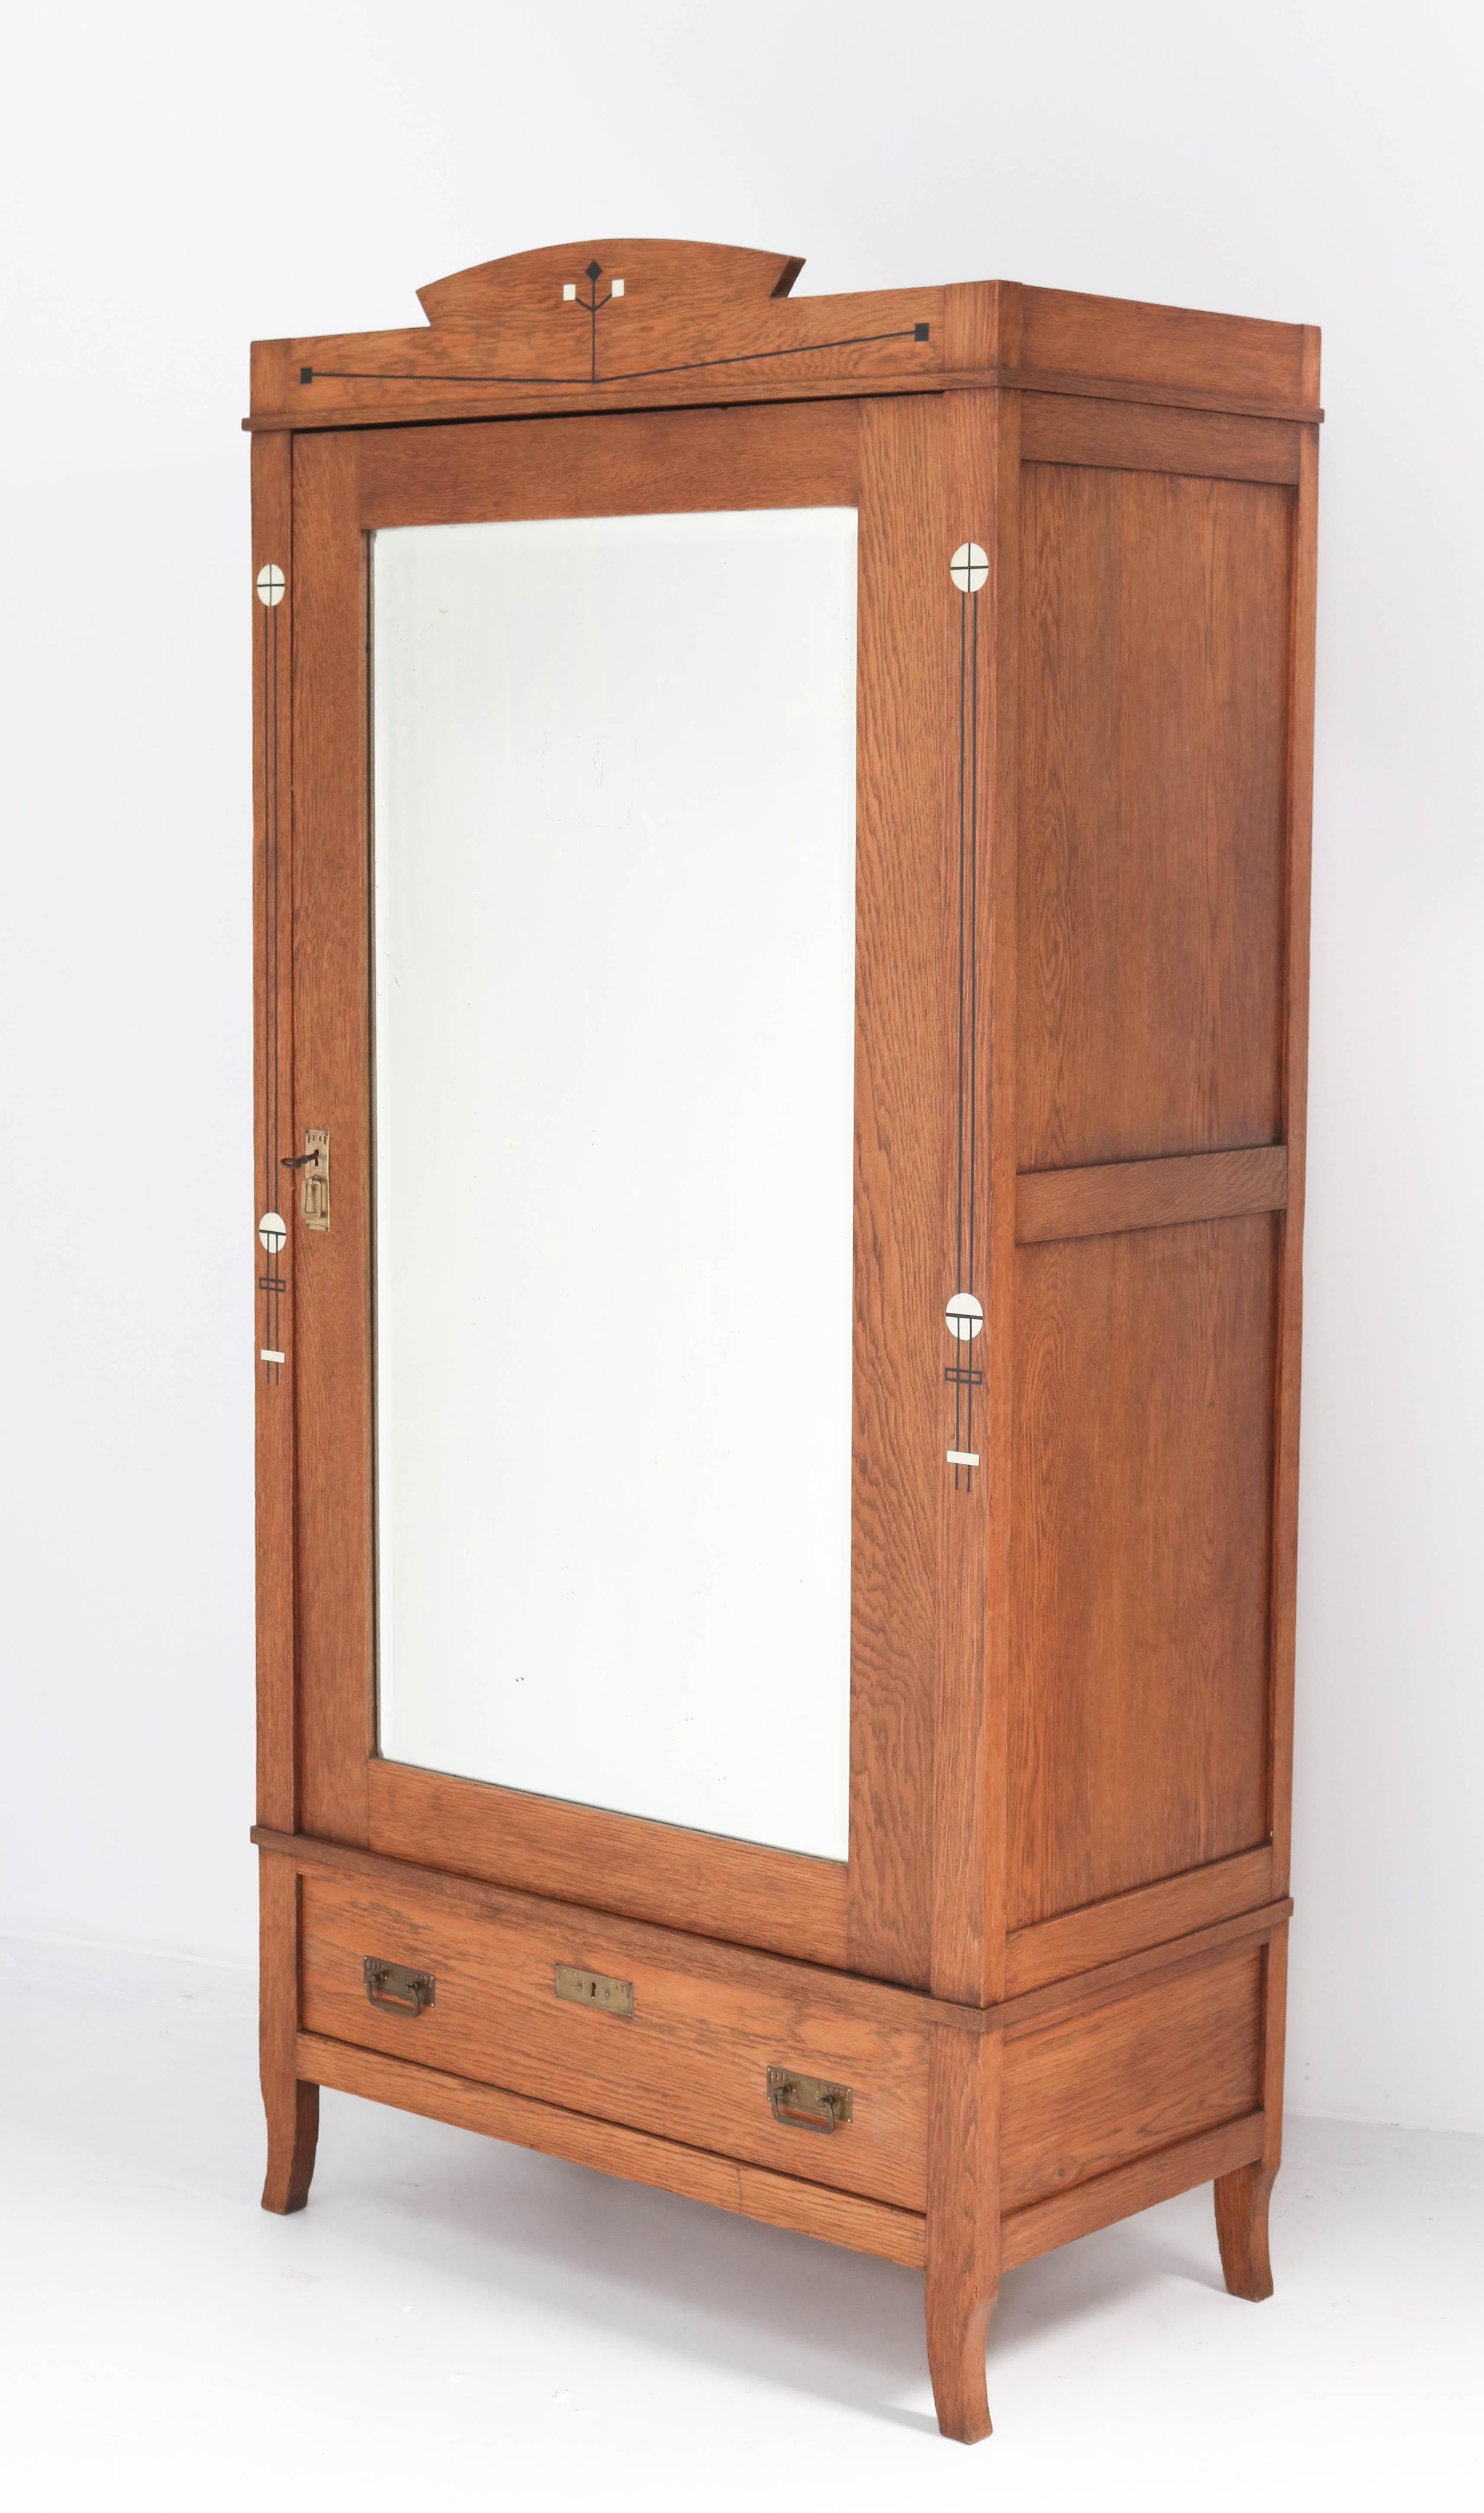 Wonderful and rare Arts & Crafts Art Nouveau armoire or wardrobe.
Striking Dutch design from the 1900s.
Solid oak with brass handles and original inlay.
The door has the original beveled mirror.
Three wooden shelves adjustable in height.
This